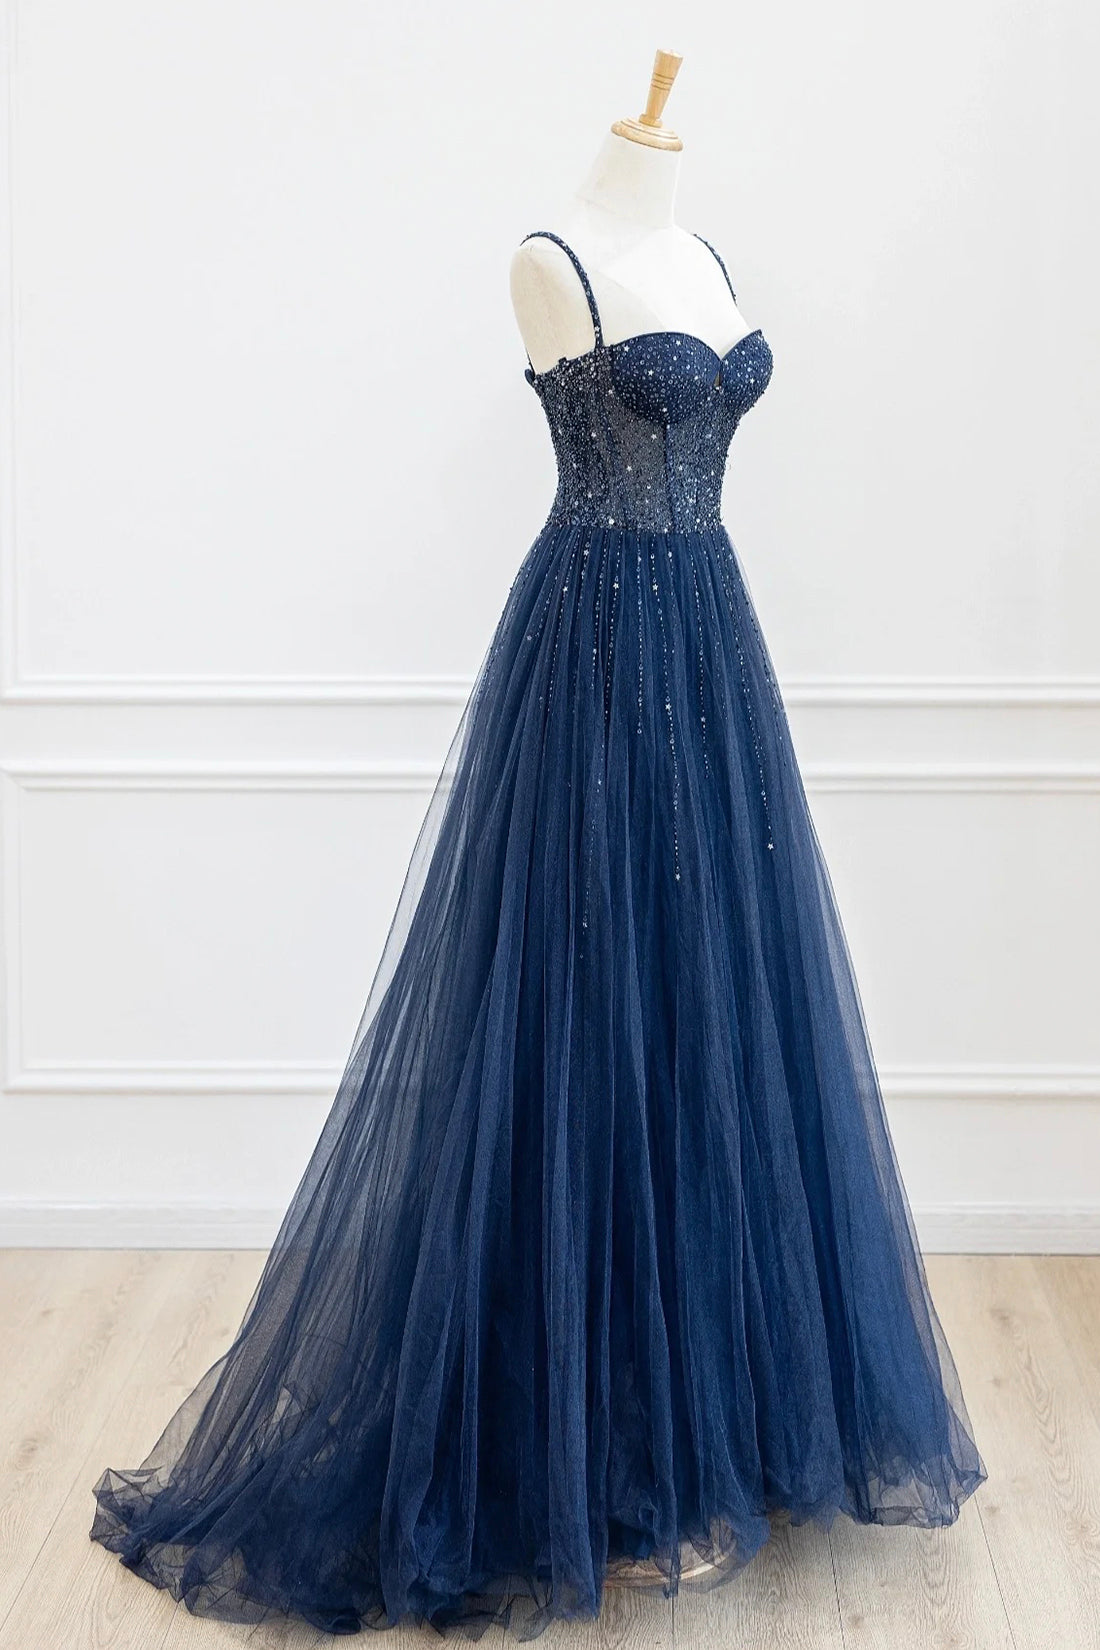 Party Dresses Pink, Blue Tulle Beaded Long Prom Dress Formal Dress, Blue Evening Dress